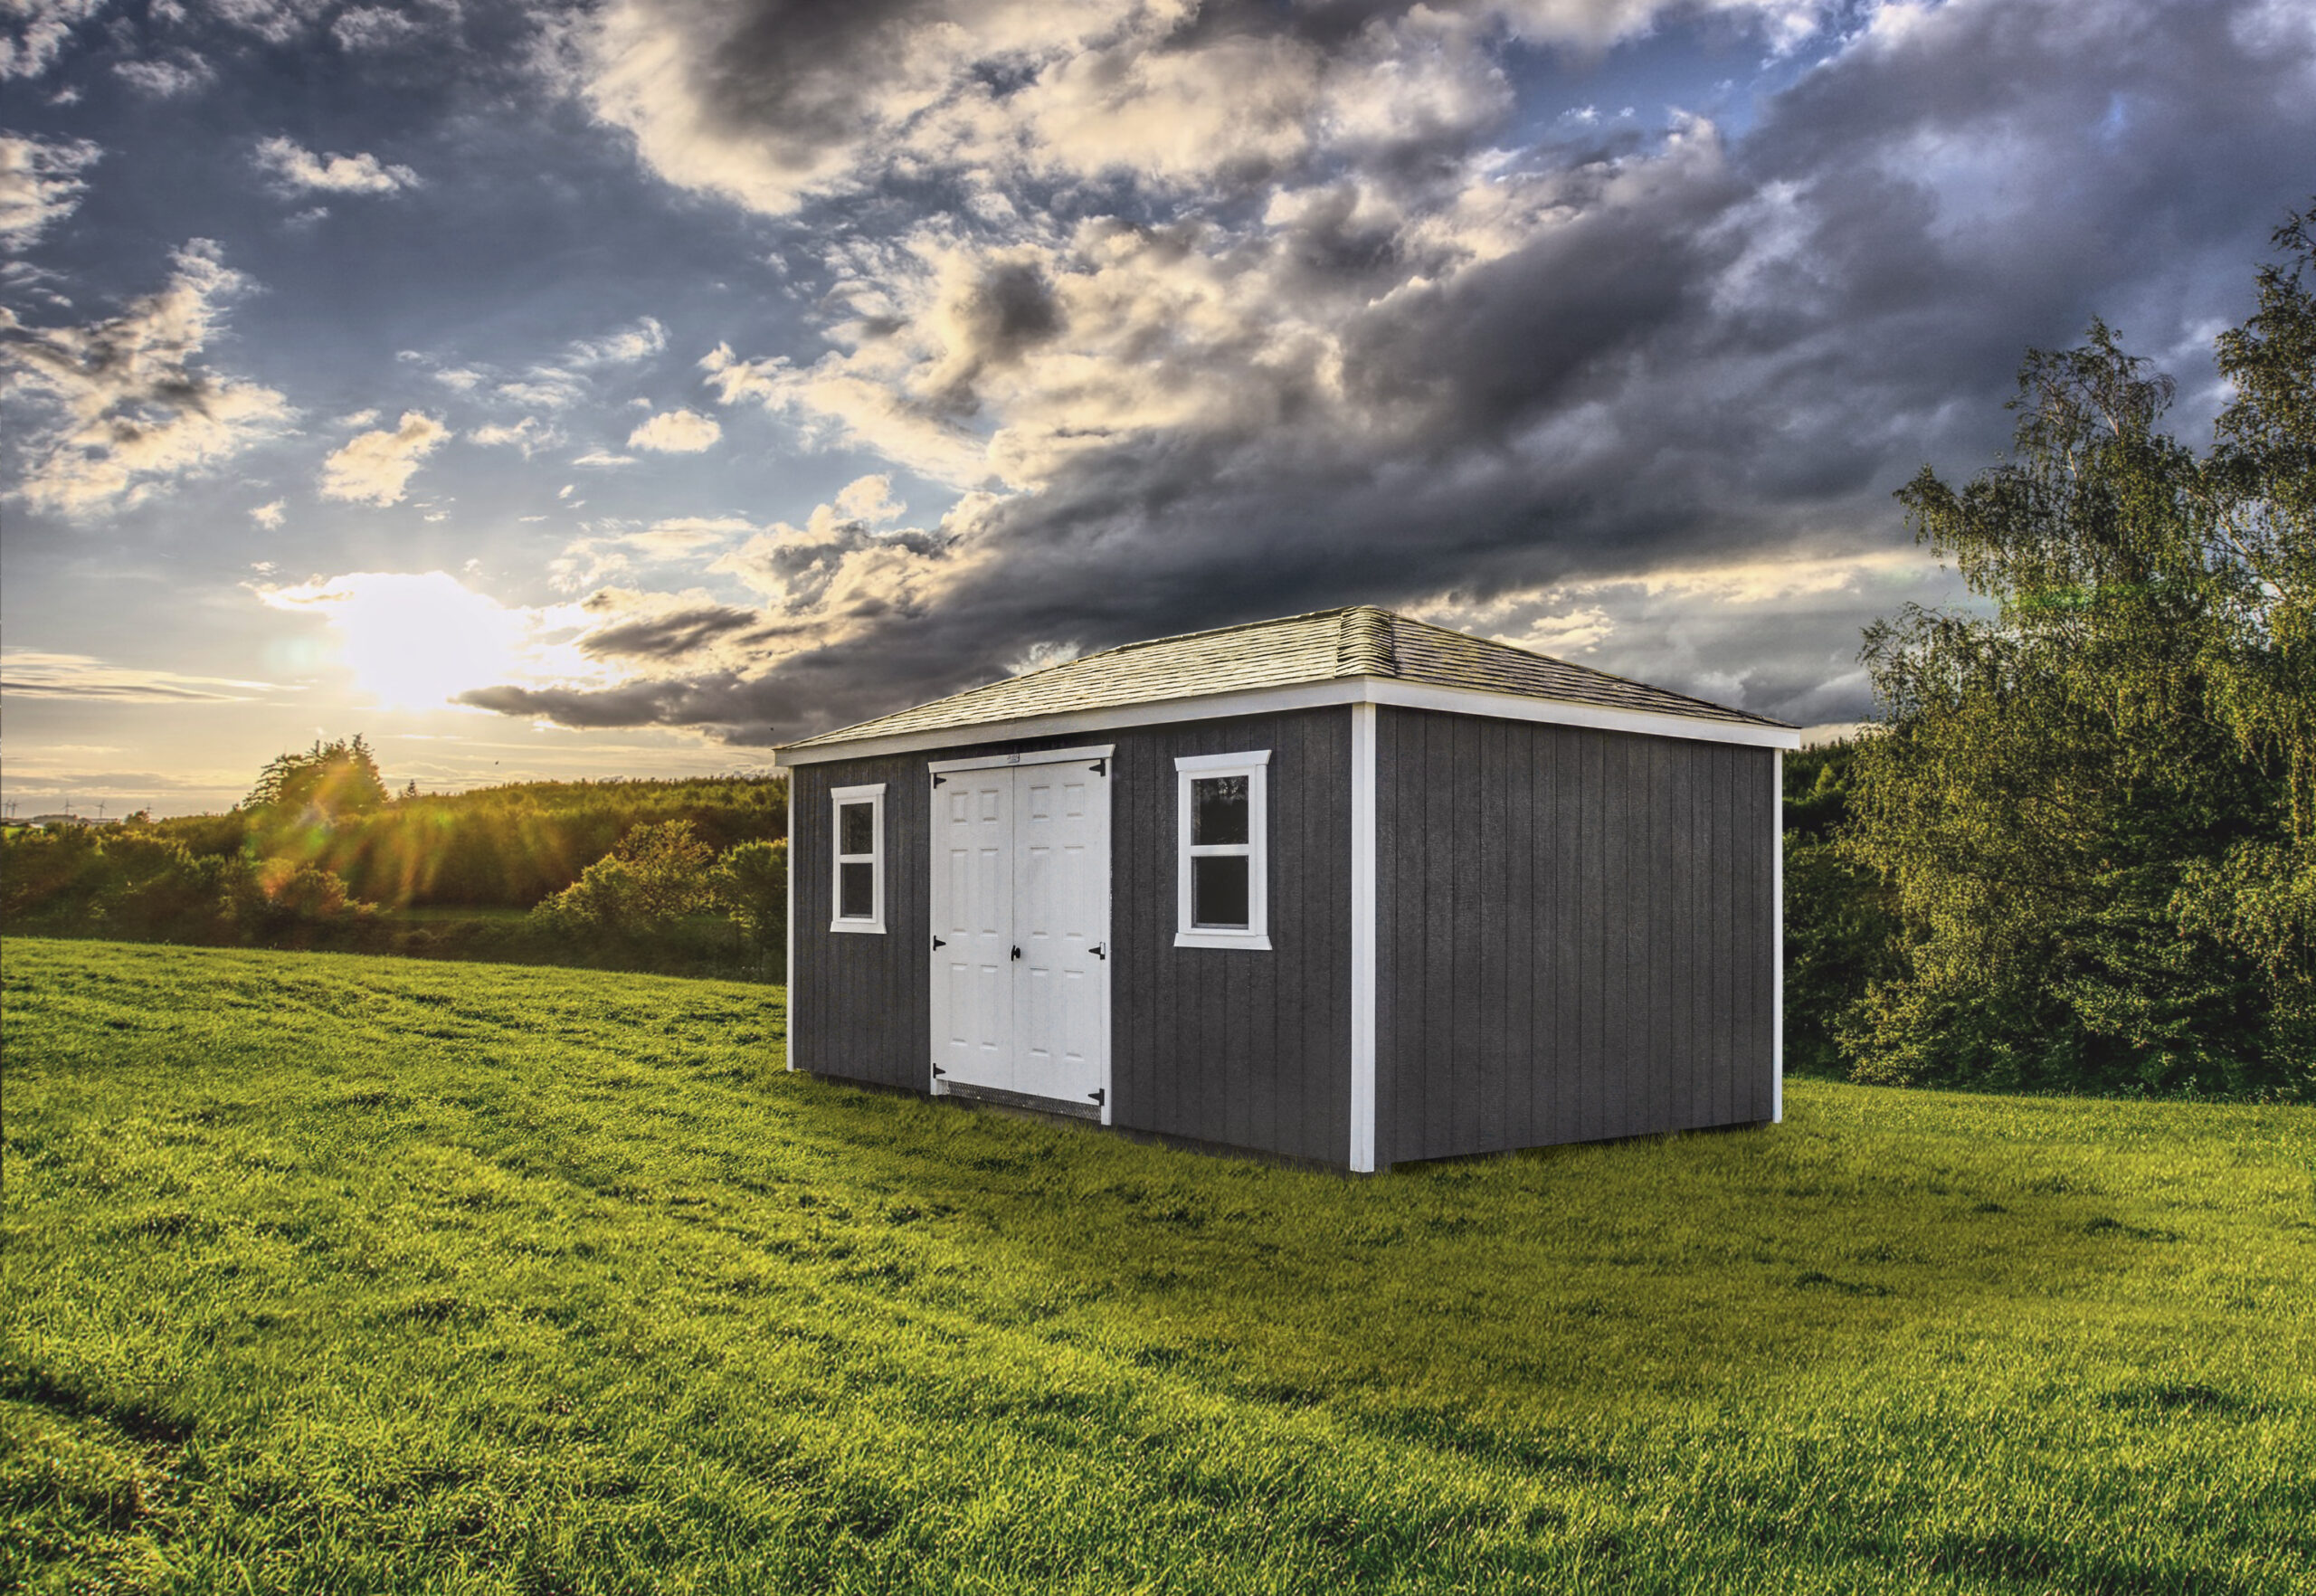 Choosing the Right Storage Building for Your Needs